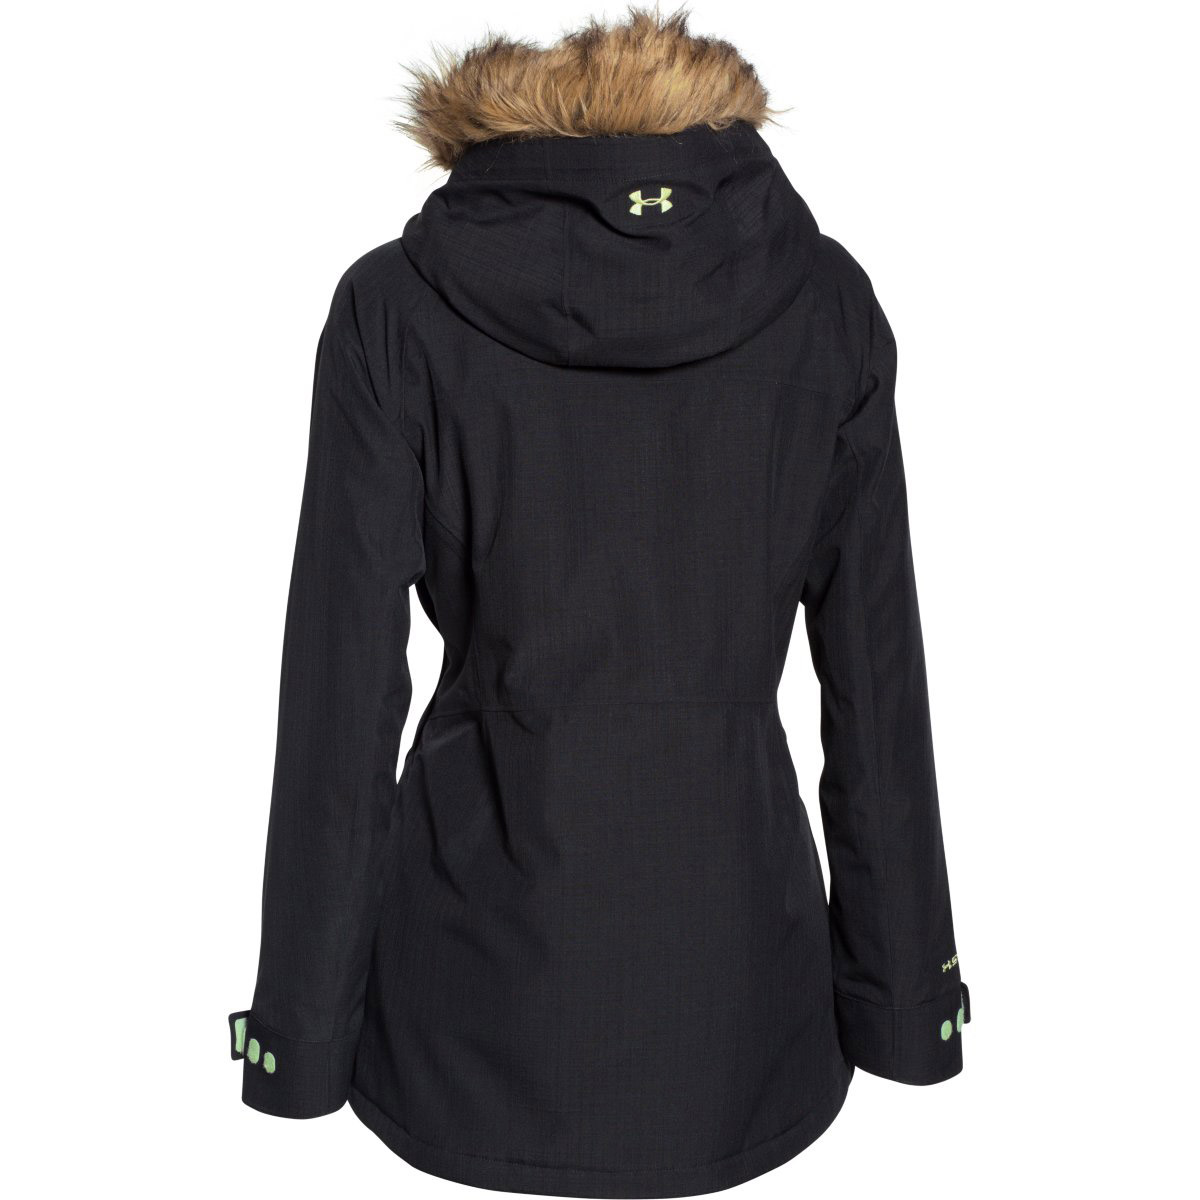 under armour coldgear infrared womens jacket